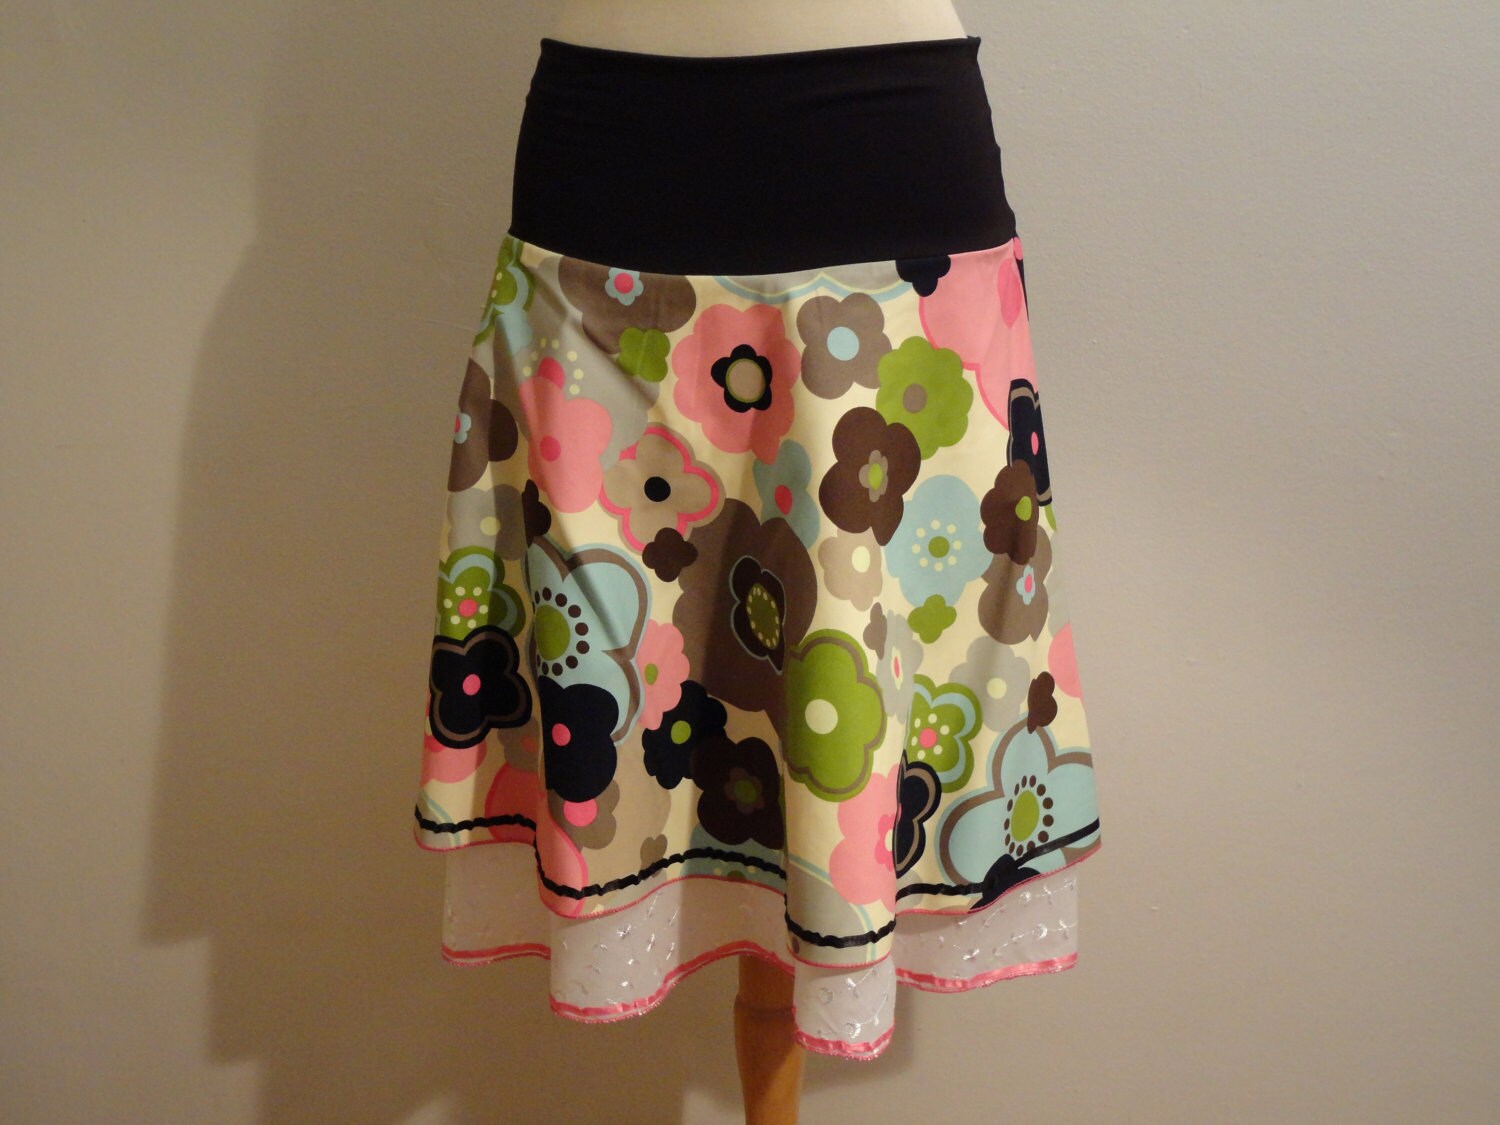 knee skirt 2 layers colorful floral print with white lace as